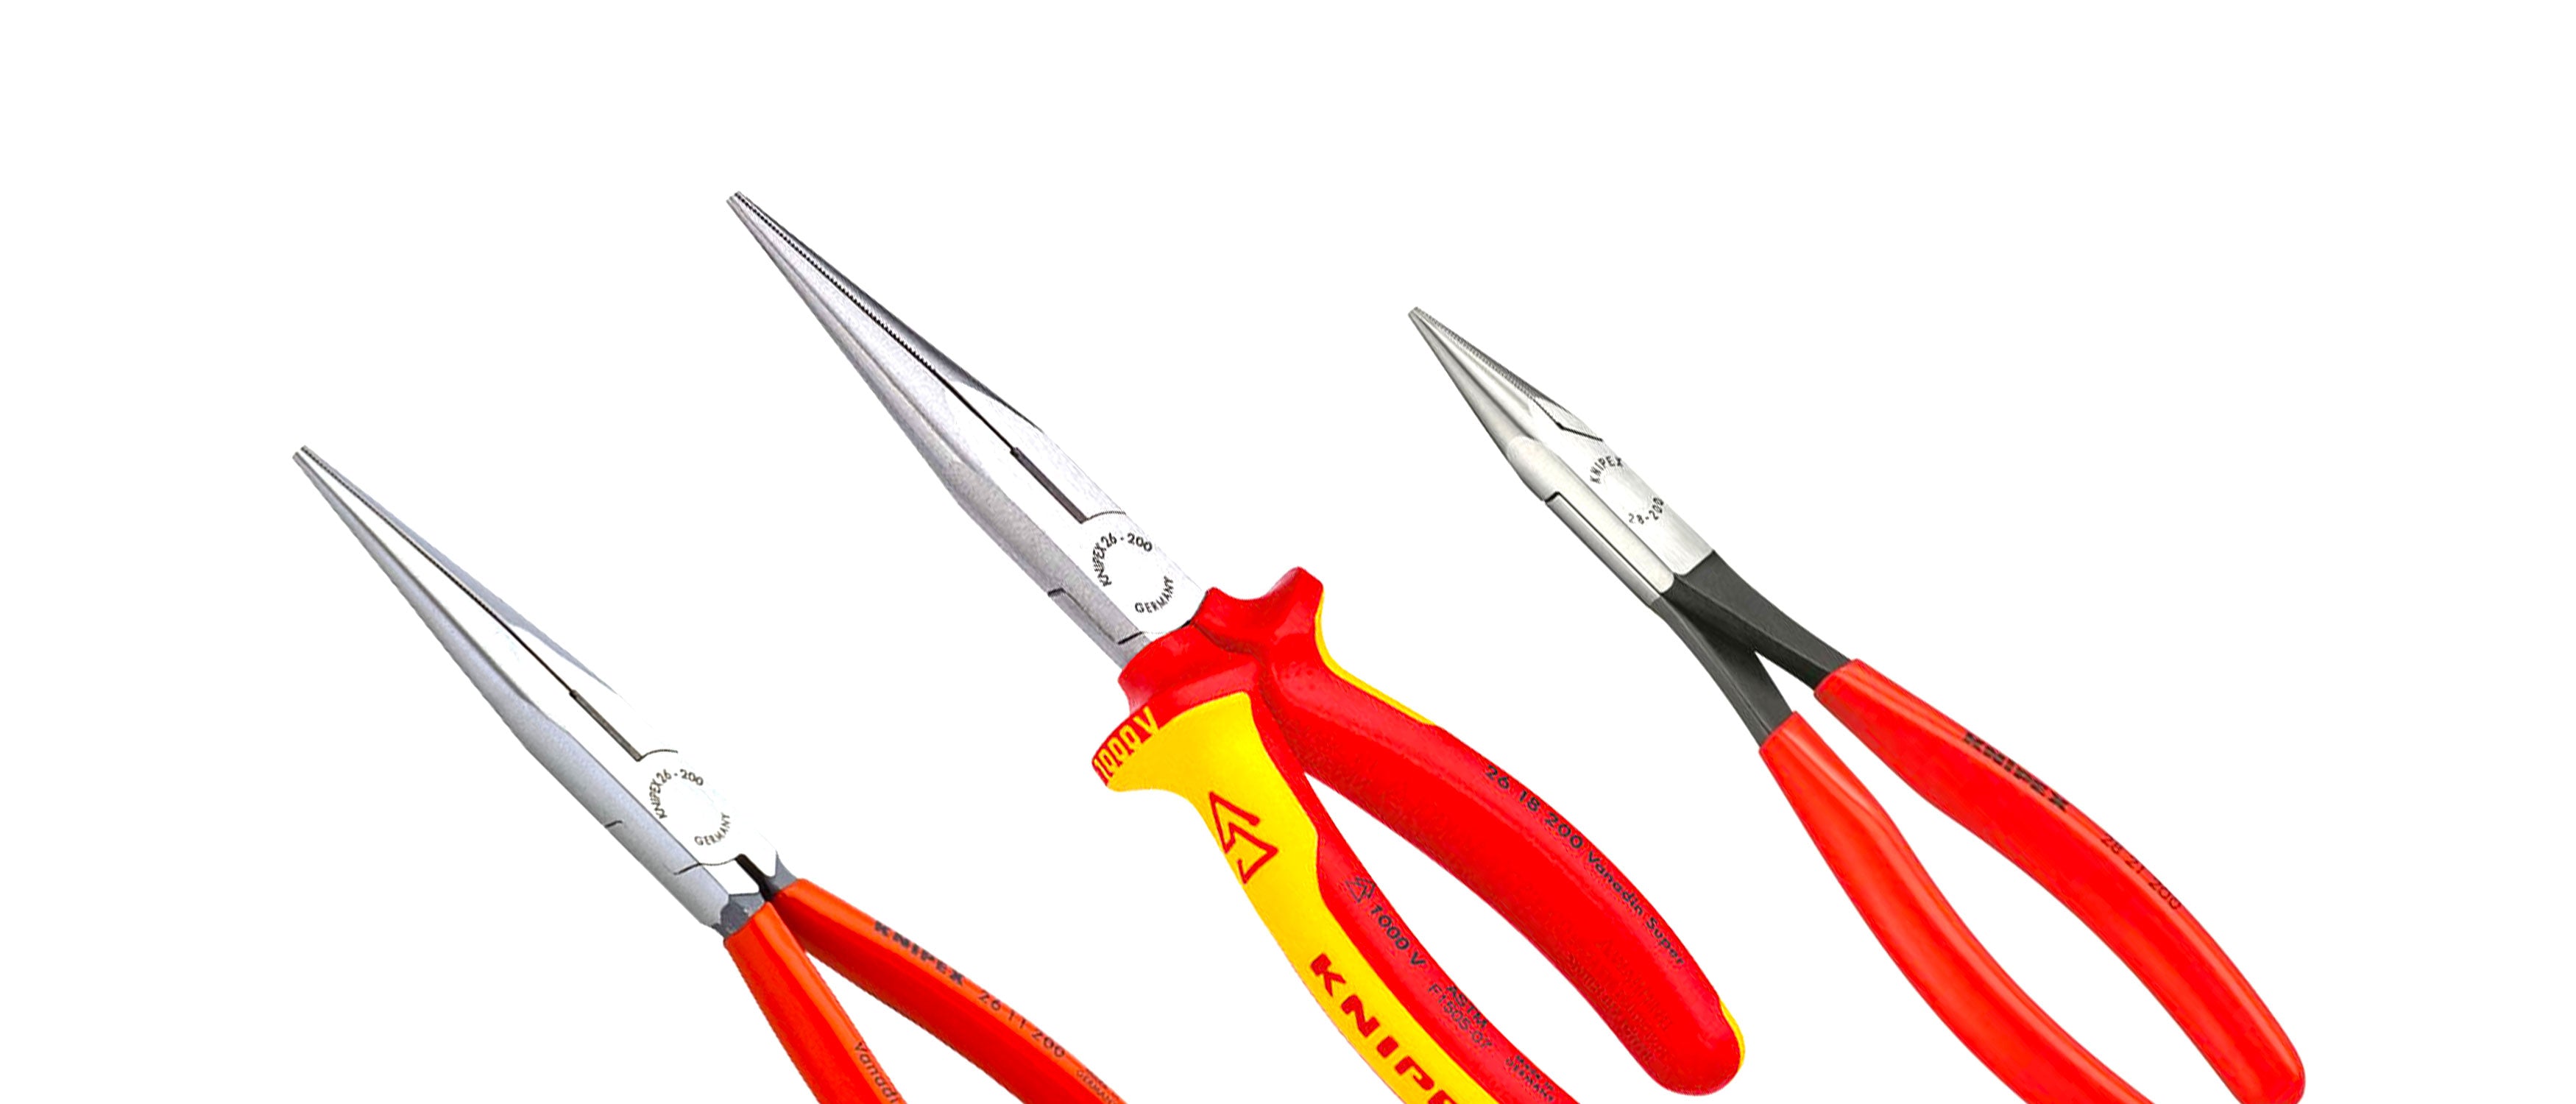 Pliers, Needle Nose Side-Cutters, 7-Inch - D203-7